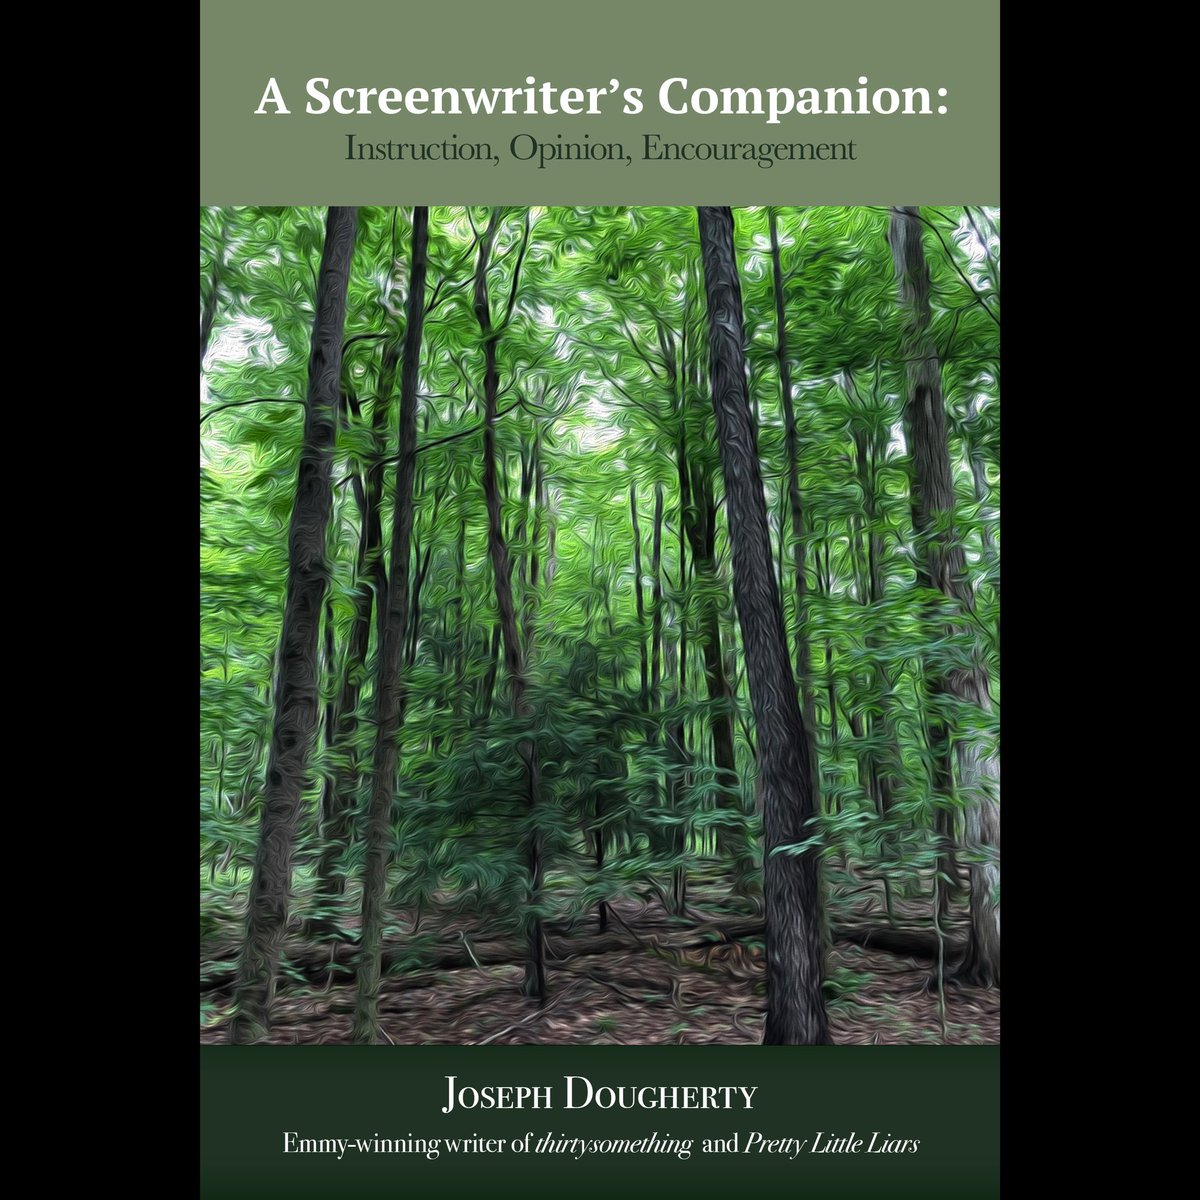 Order the book that will teach you how to write or at least point you in that direction. Joe Dougherty has a hit Off-Broadway play right now. Learn from the best. Order his book at tuckerdspress.com #WritingCommunity #writers